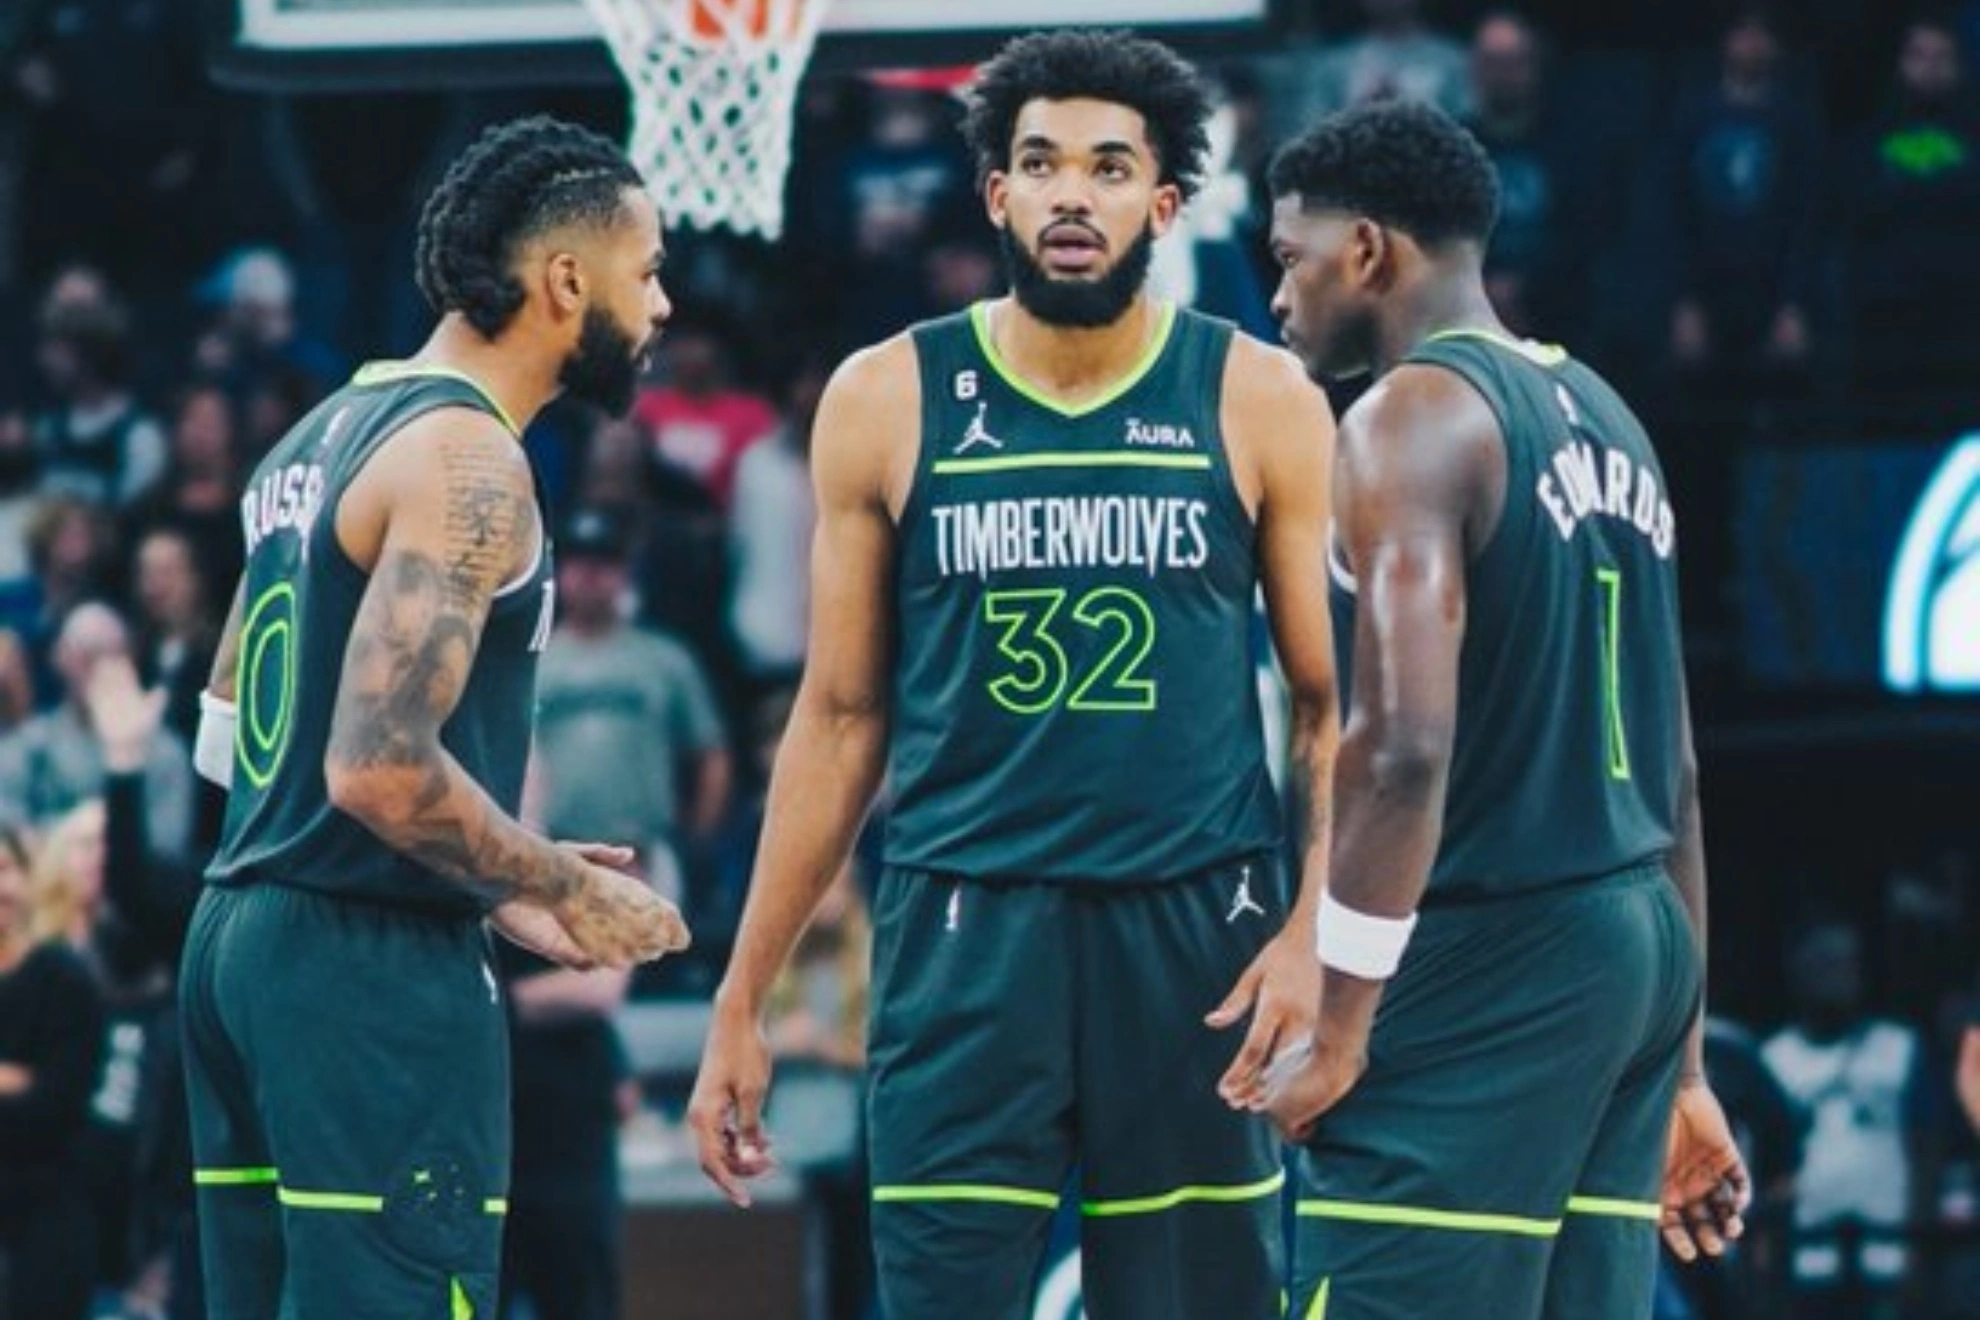 Micah Nori, the Timberwolves assistant coach brutally described the team's defense with humorous one-liner after their recent defeat against the Pelicans